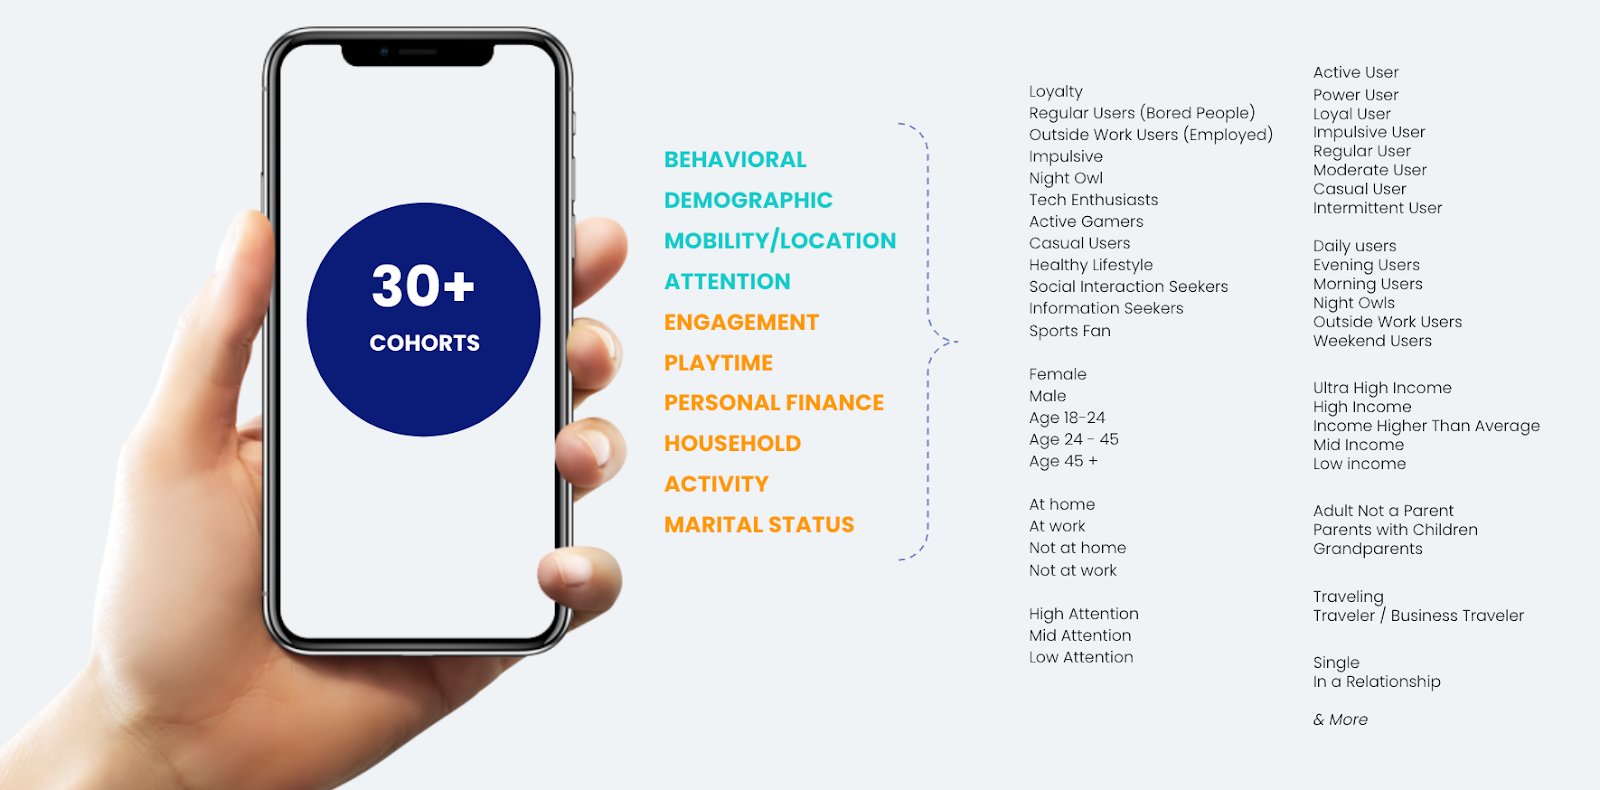 ATOM 3.0 has 30+ cohorts, including demographics, mobile engagement, income level, household, marital status, activity, gaming playtime, and more.